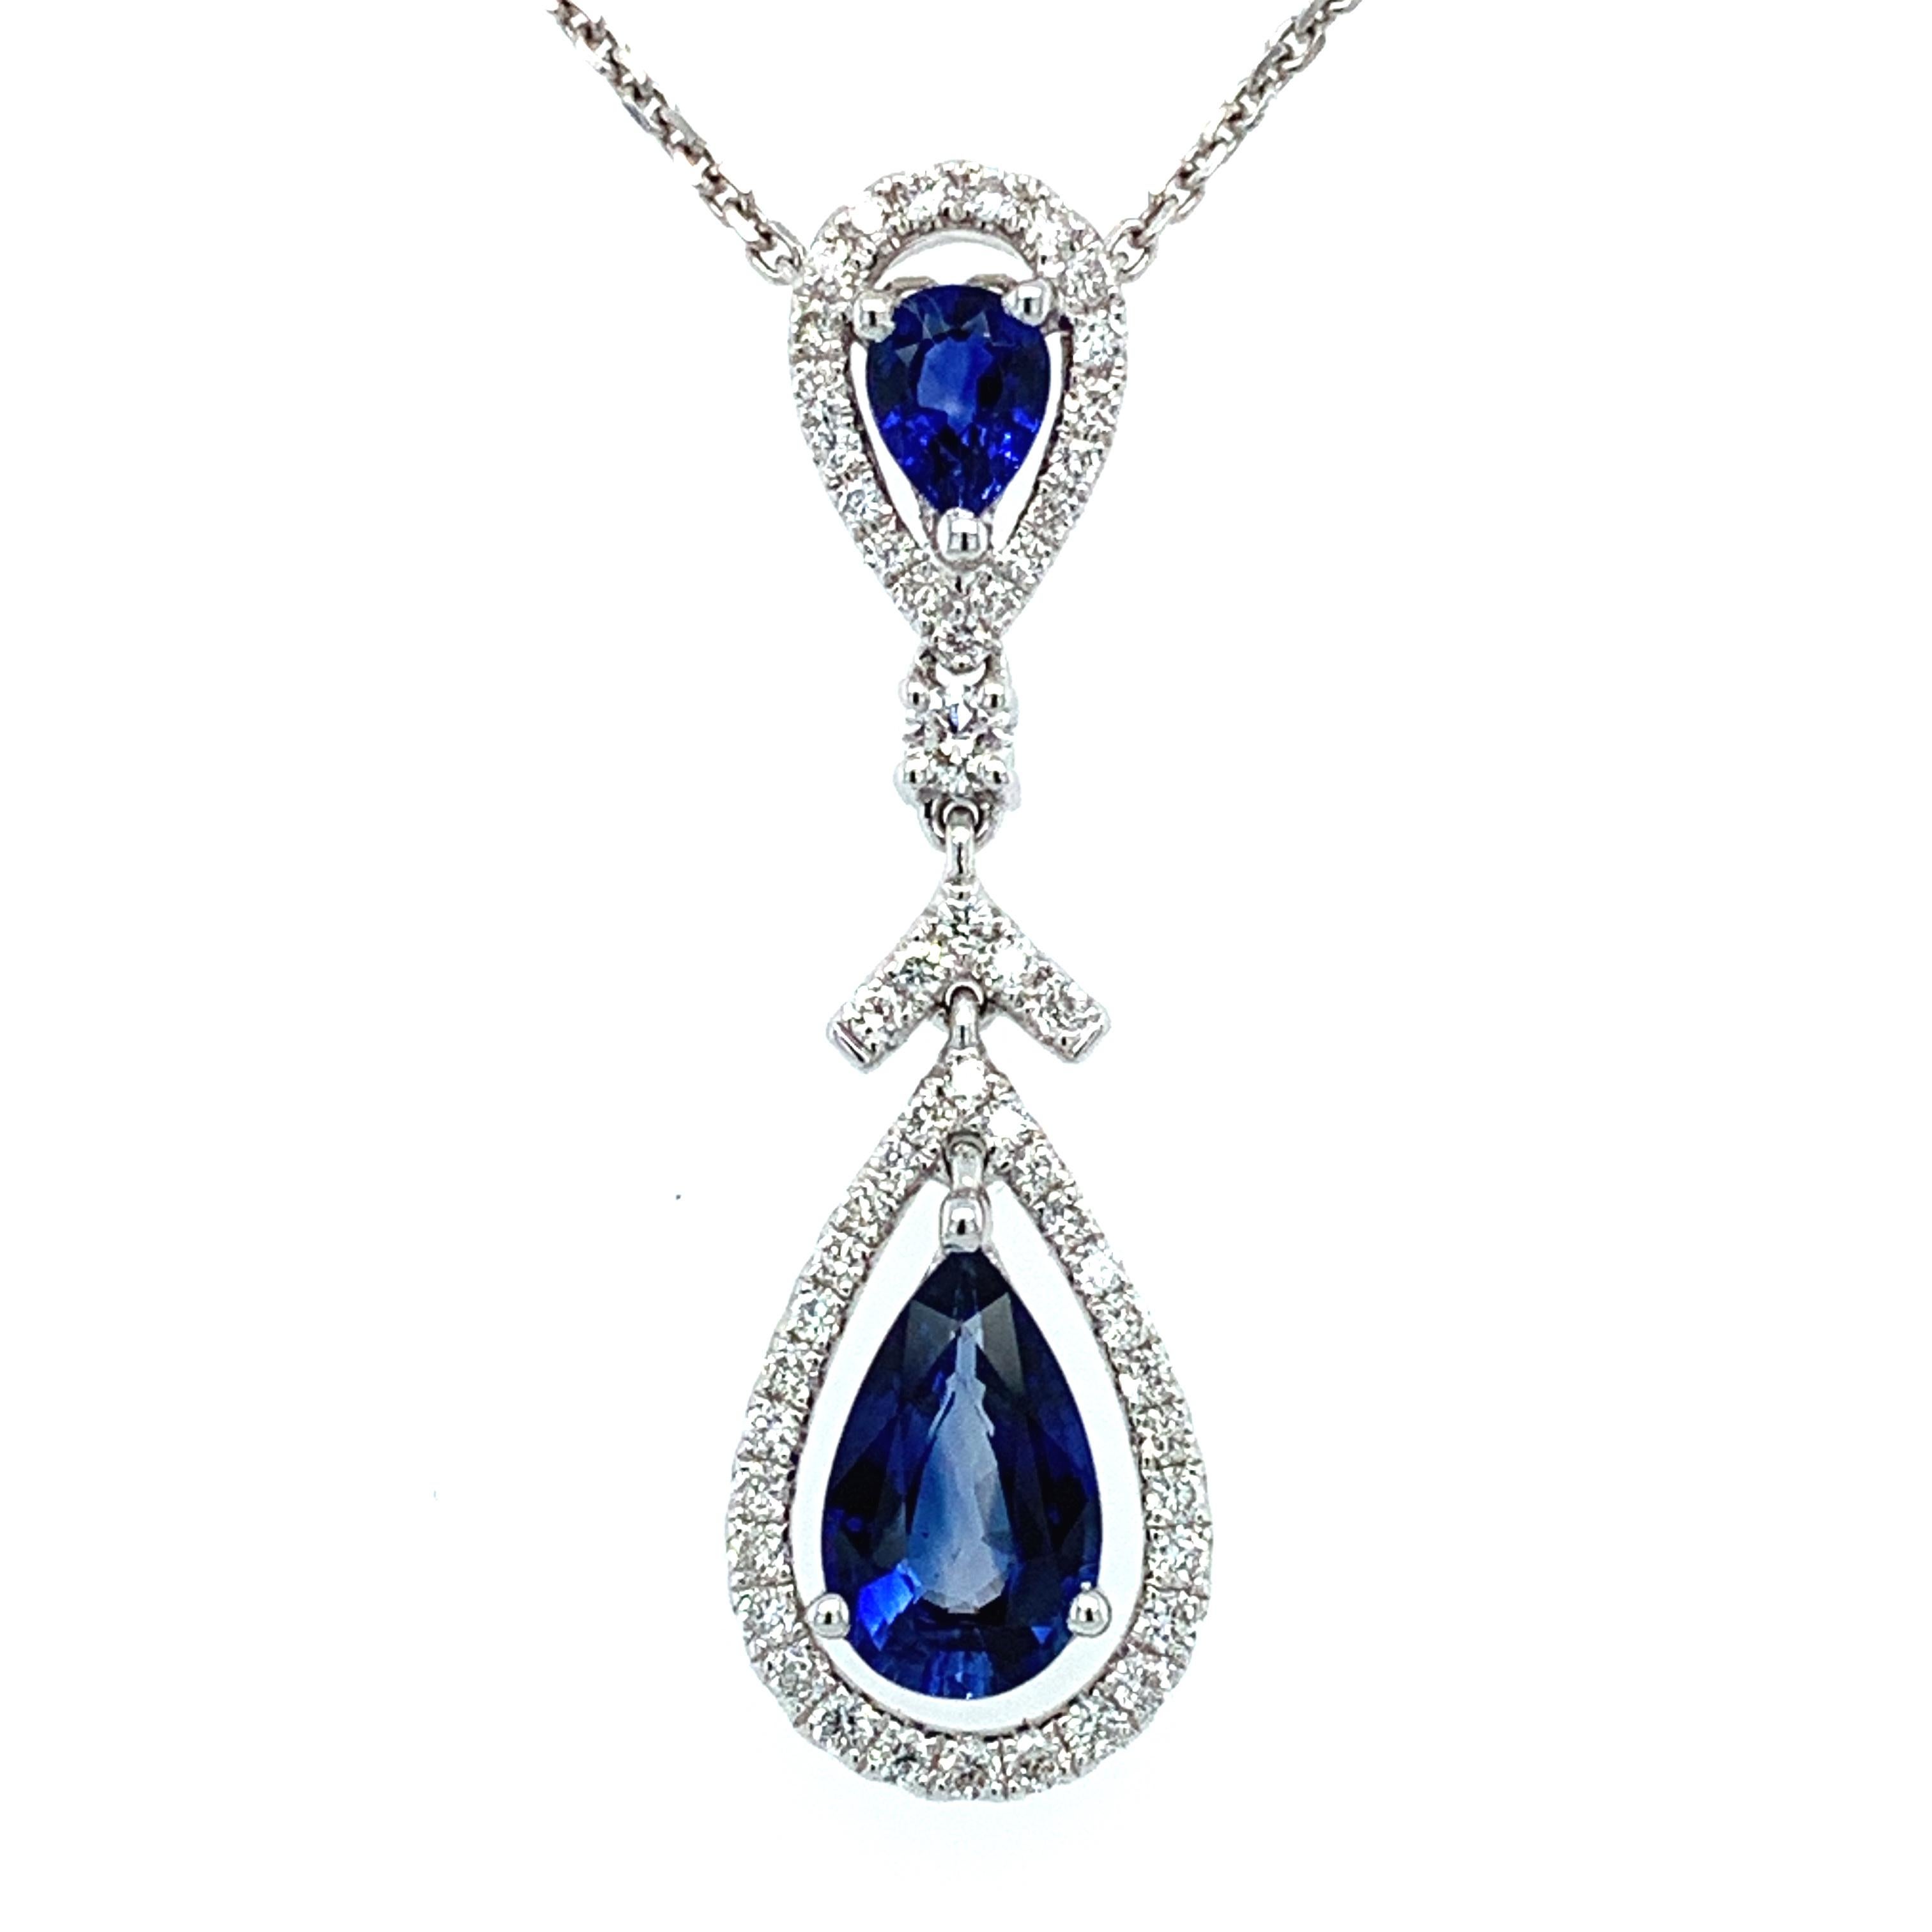 Elevate your jewellery collection with this stunning sapphire and diamonds necklace. Crafted from 18ct white gold, this necklace features a beautiful Ceylon blue pear-shaped sapphire stone surrounded be a halo of a sparkling diamonds. The necklace